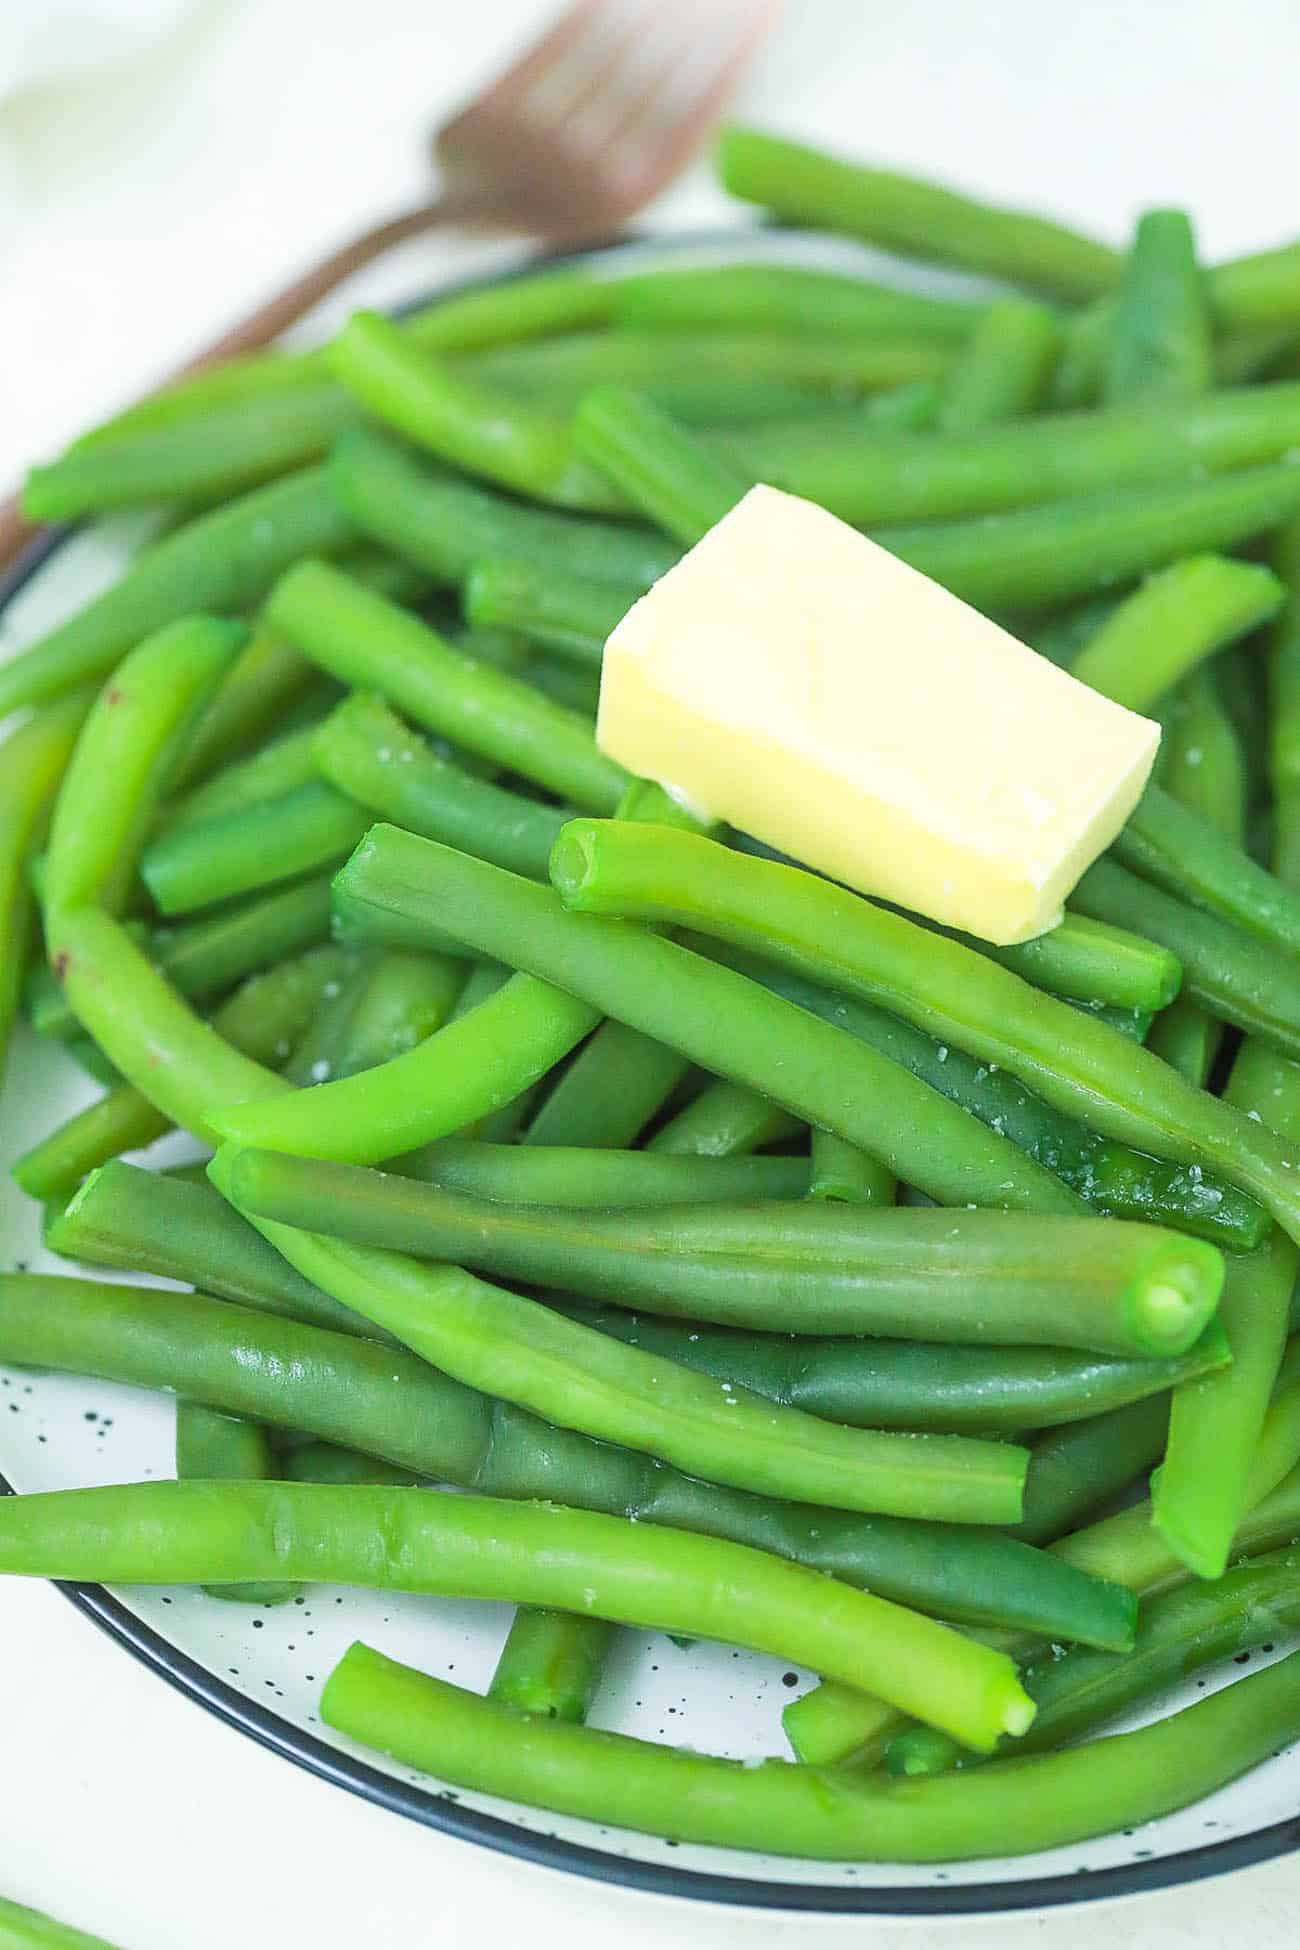 Molester kwaadaardig ego How To Boil Green Beans (Super Simple Recipe!) | The Picky Eater